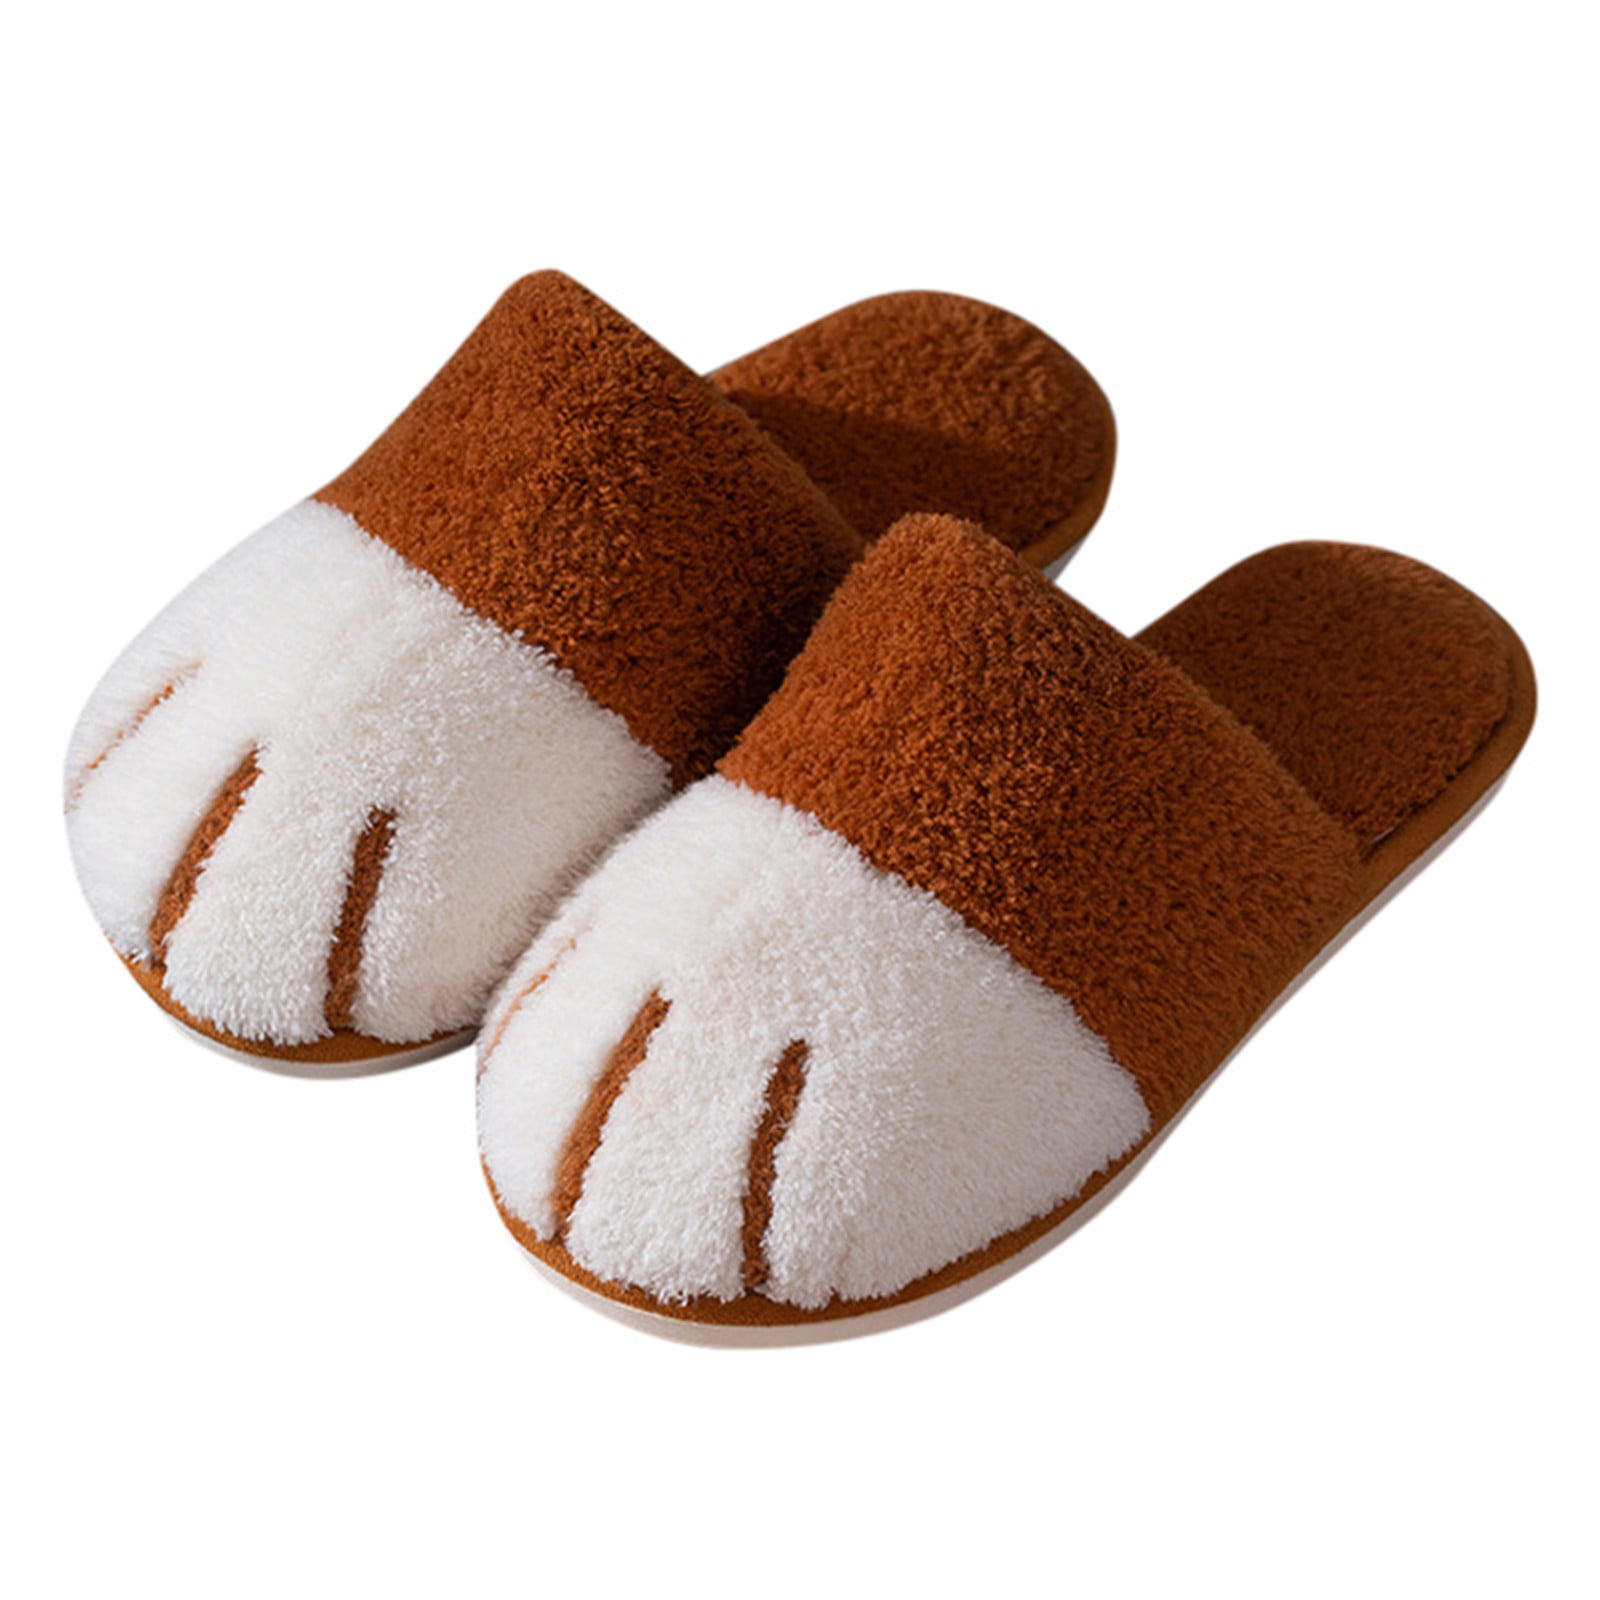 Cattior Mens Colorful Comfy Warm Fur Slippers PU Leather Slippers 